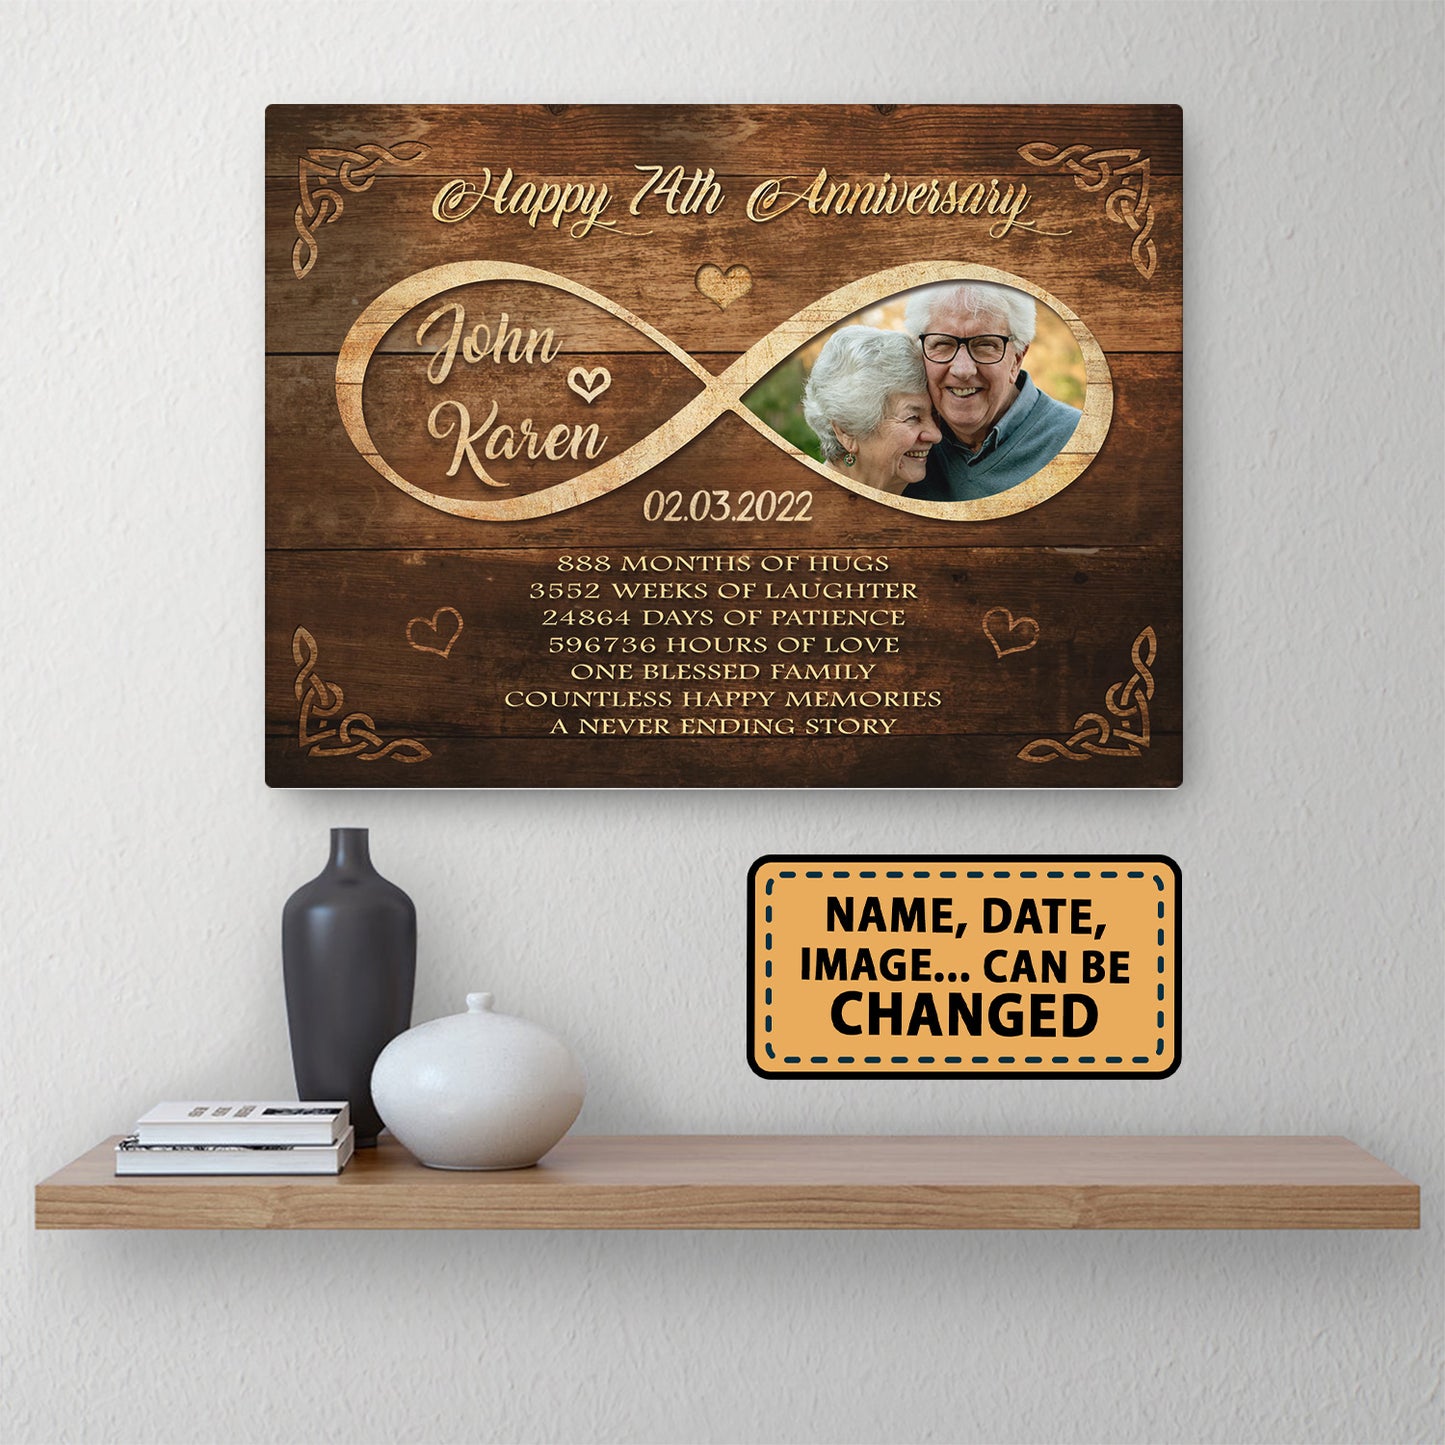 Happy 74th Anniversary Old Television Anniversary Canvas Valentine Gifts